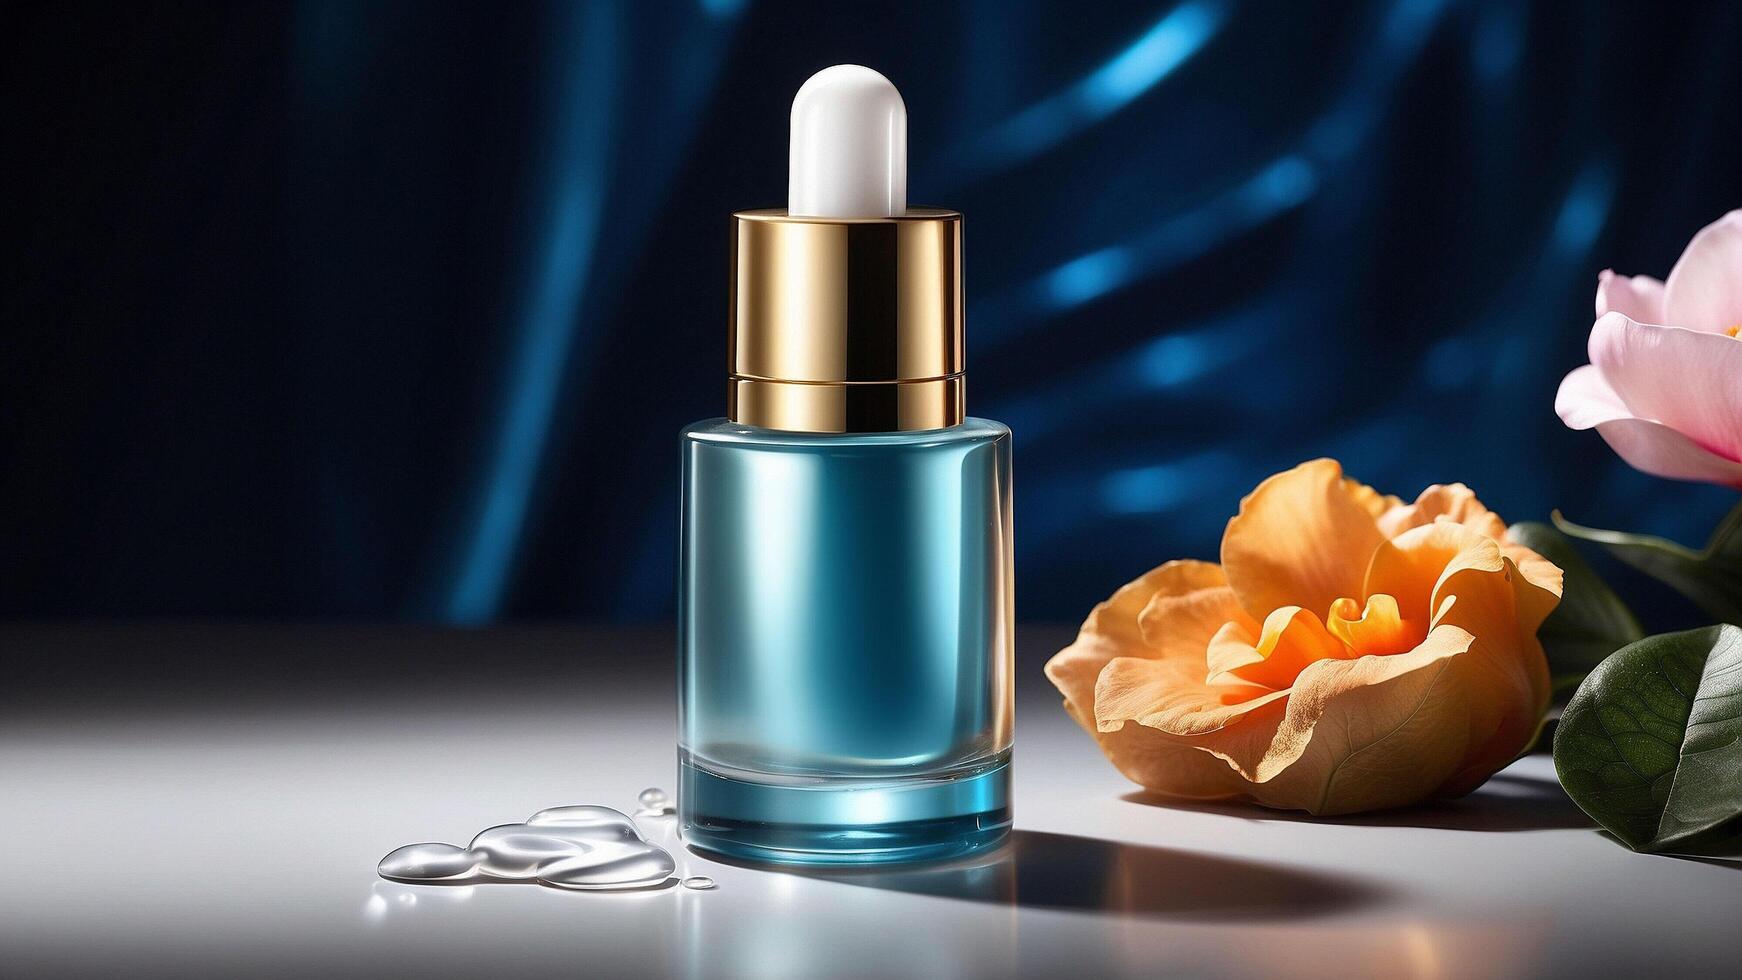 Opulent Aqua Glass Facial Serum with Golden Dropper Amidst Soft Floral Ambience photo